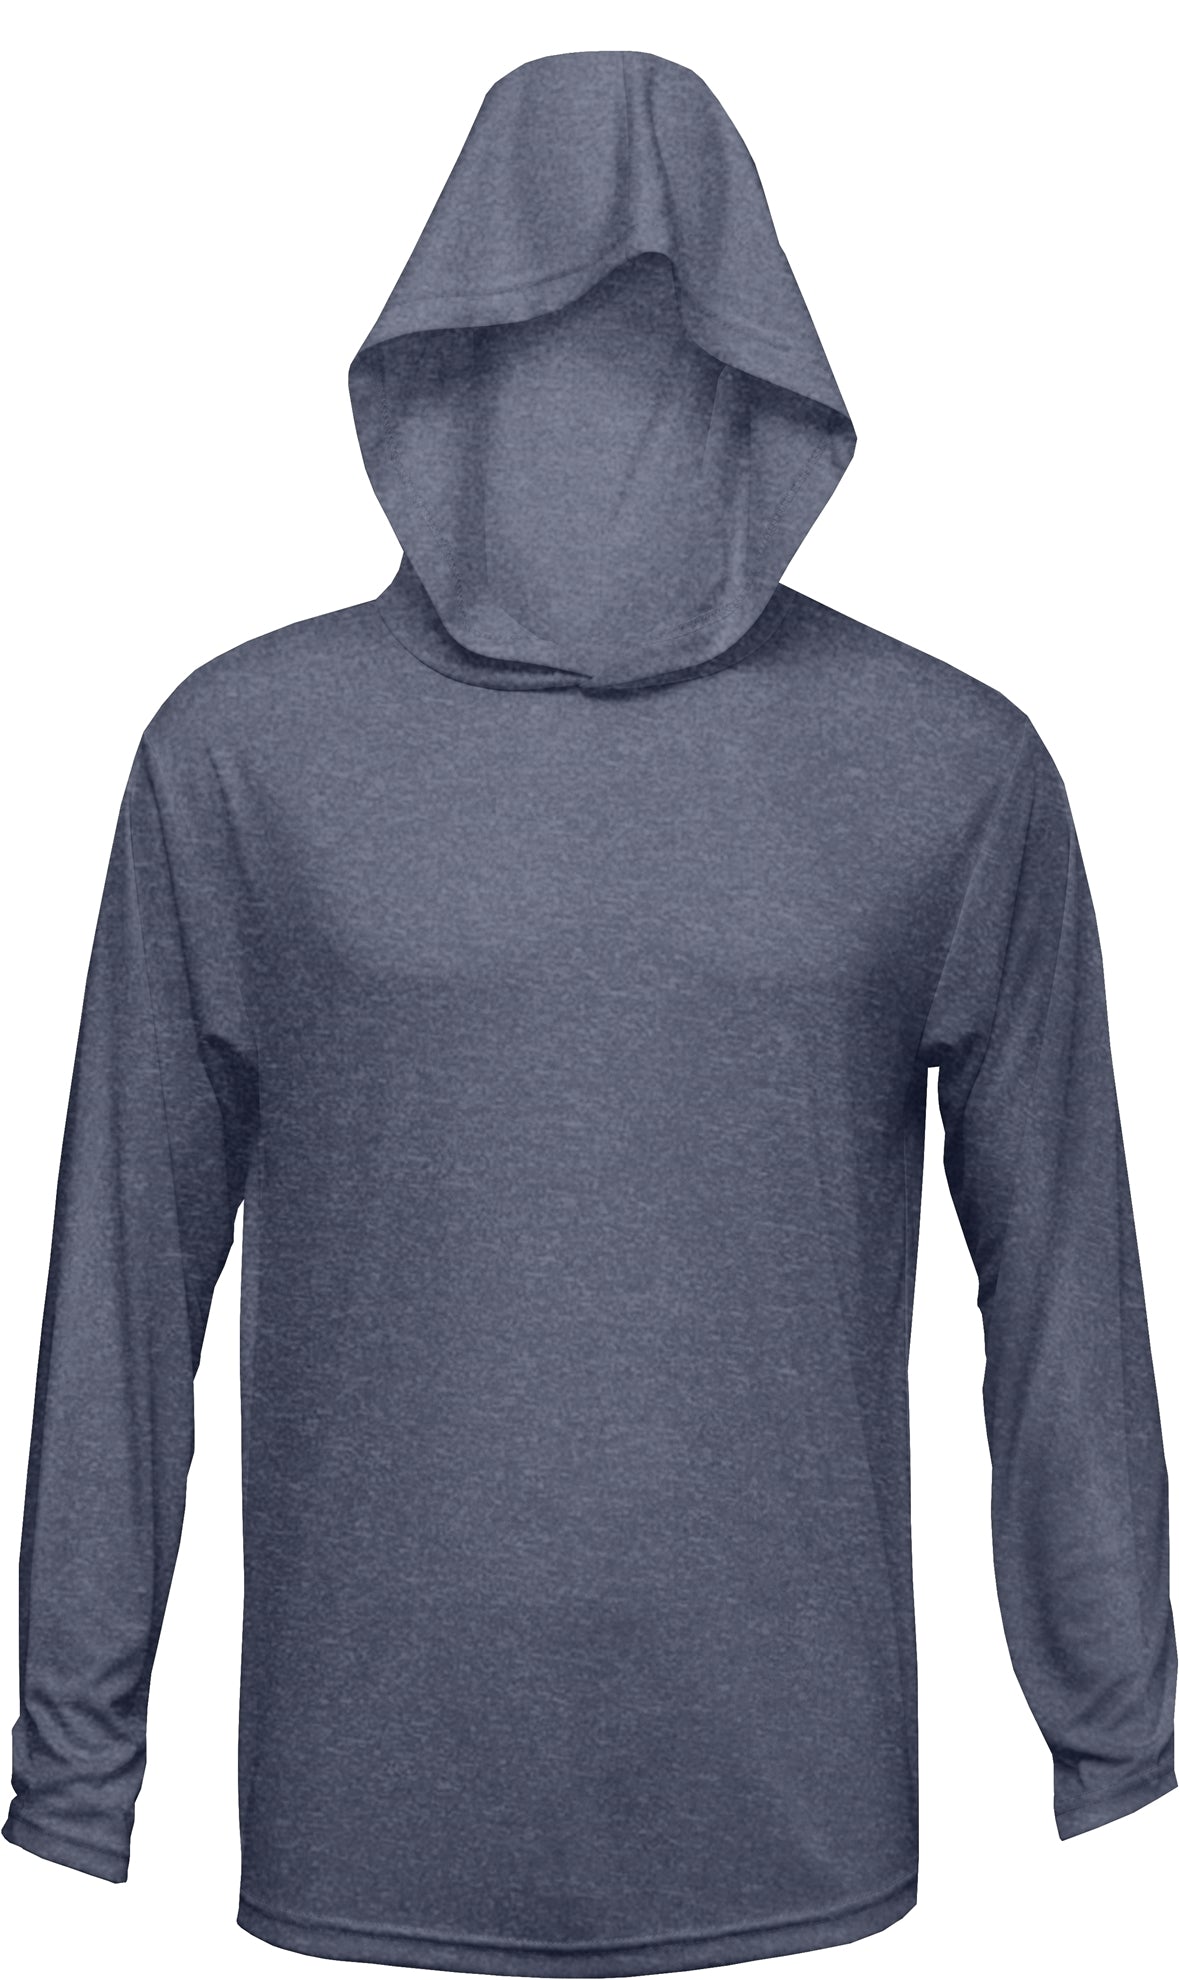 Performance Hooded Long Sleeve T